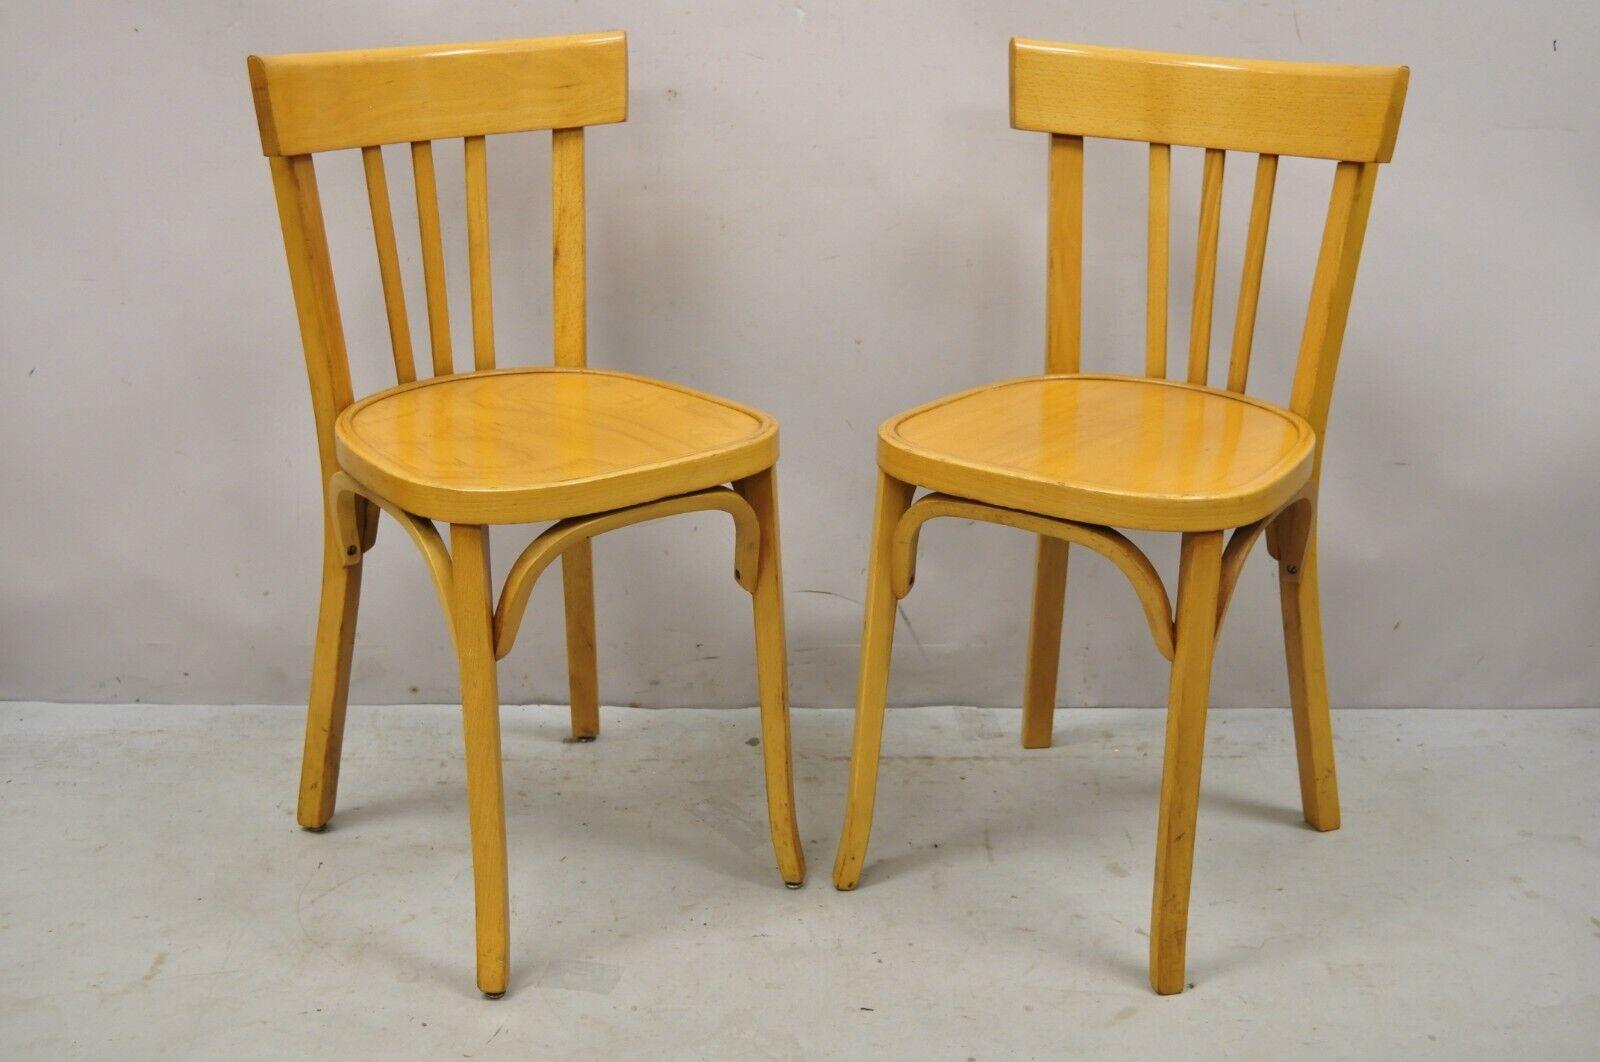 Vintage Baumann 83 Parisian Bistro Bentwood Dining Chairs - Set of 6. Item features (6) side chairs, beautiful wood grain, original stamp, very nice vintage set, great style and form. circa 1970s. Measurements: 31